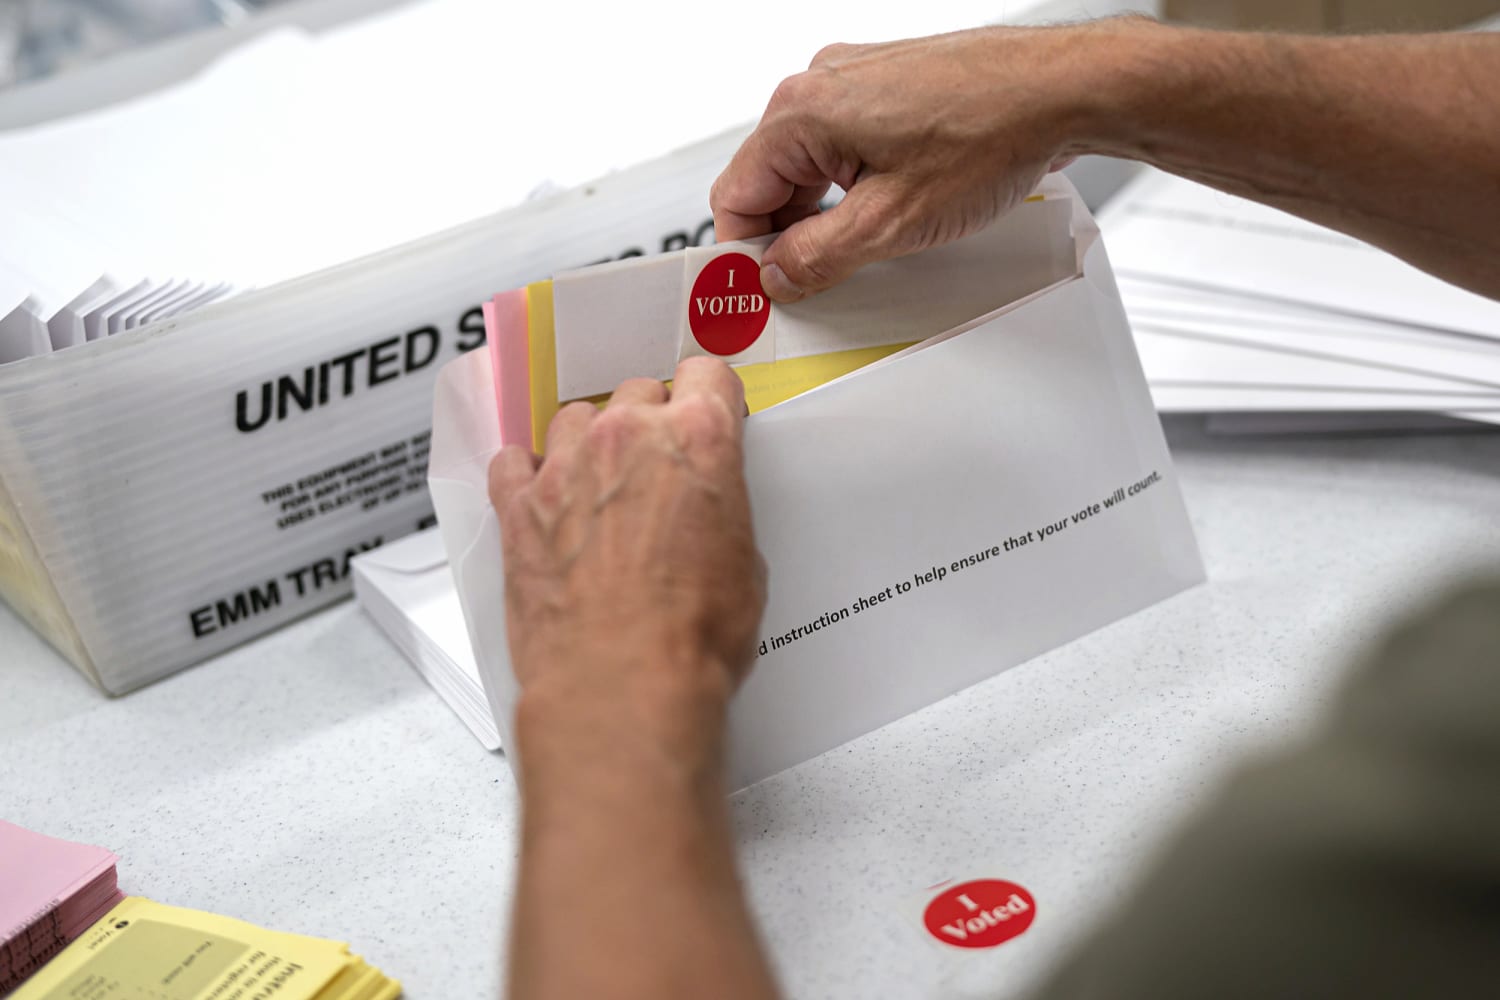 Trump campaign, RNC sue rogue Iowa officials over mail ballots pic